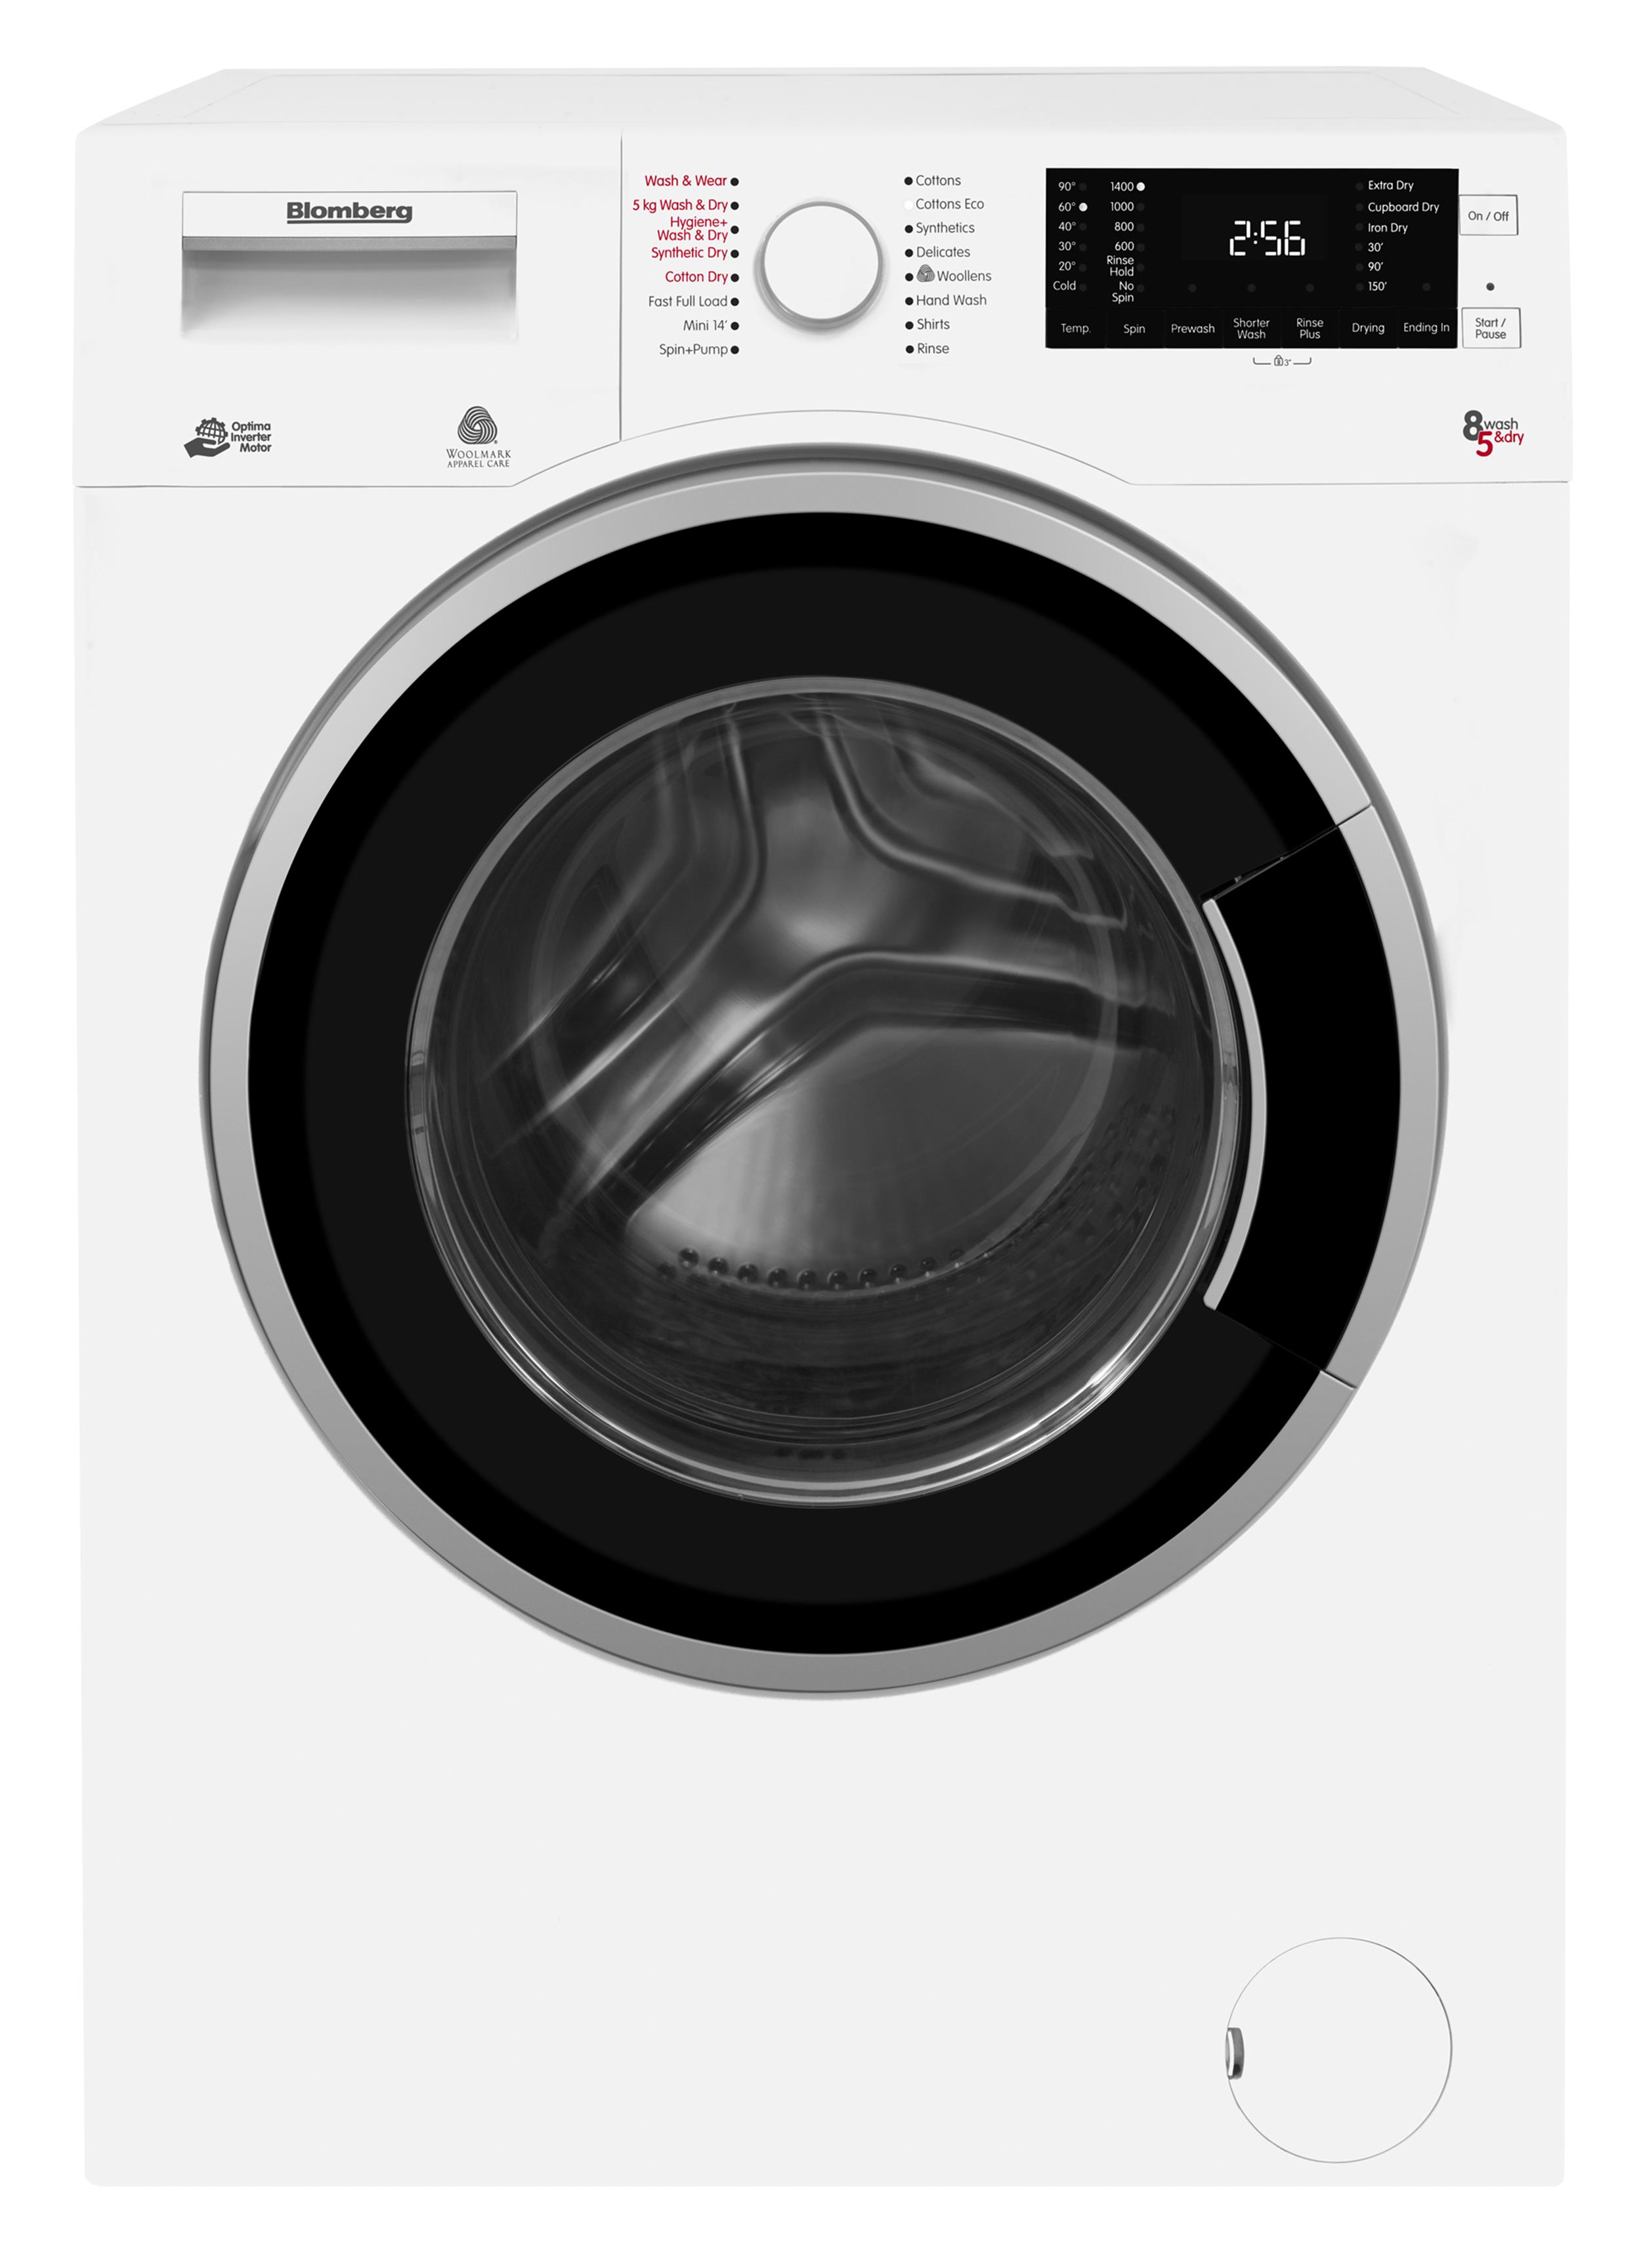 lrf285411-washer-dryer-with-8kg-5kg-capacity